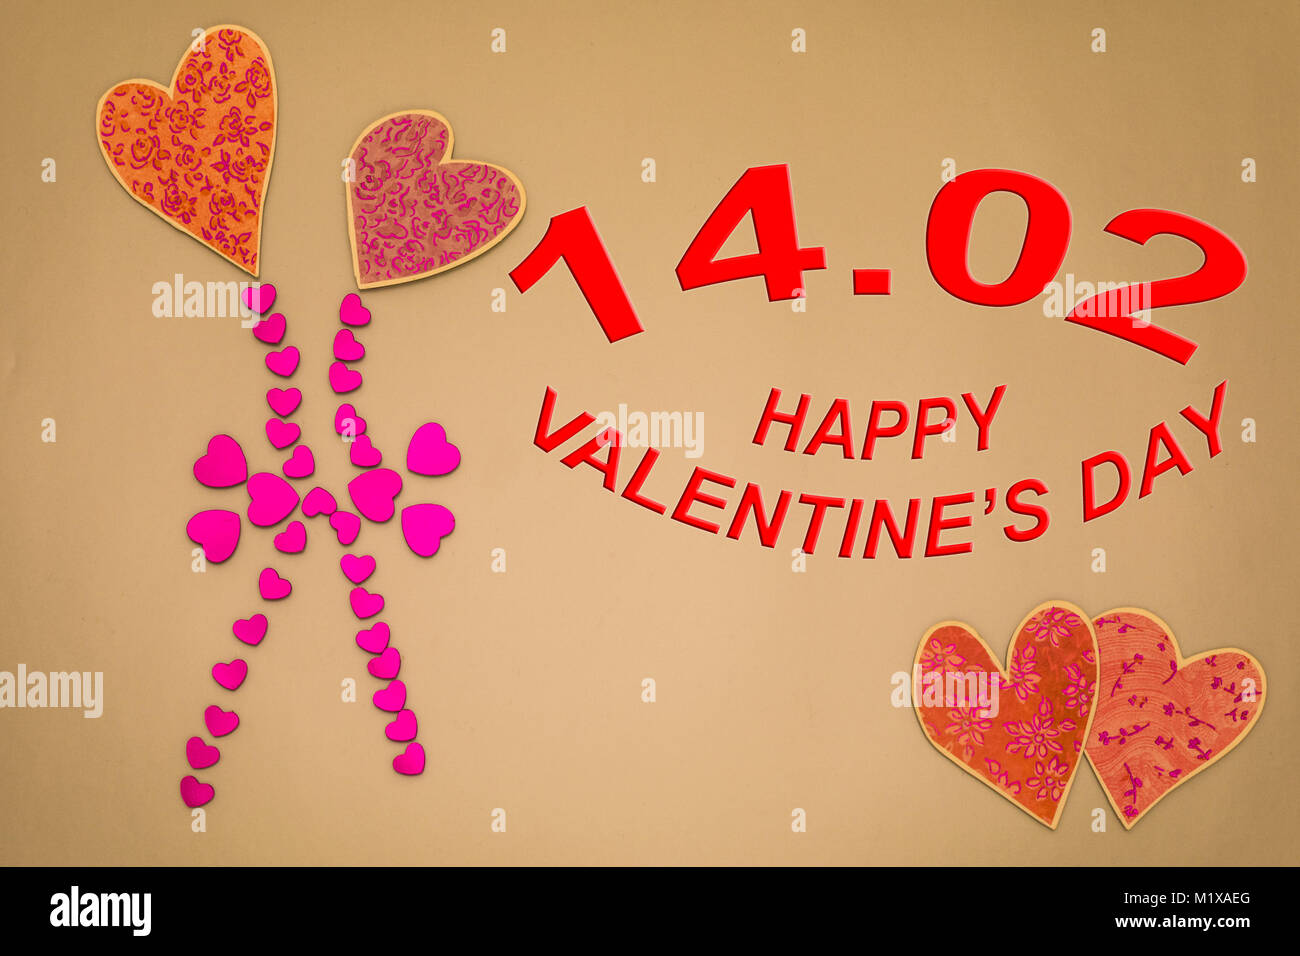 Valentines day card with hearts on colored background Stock Photo